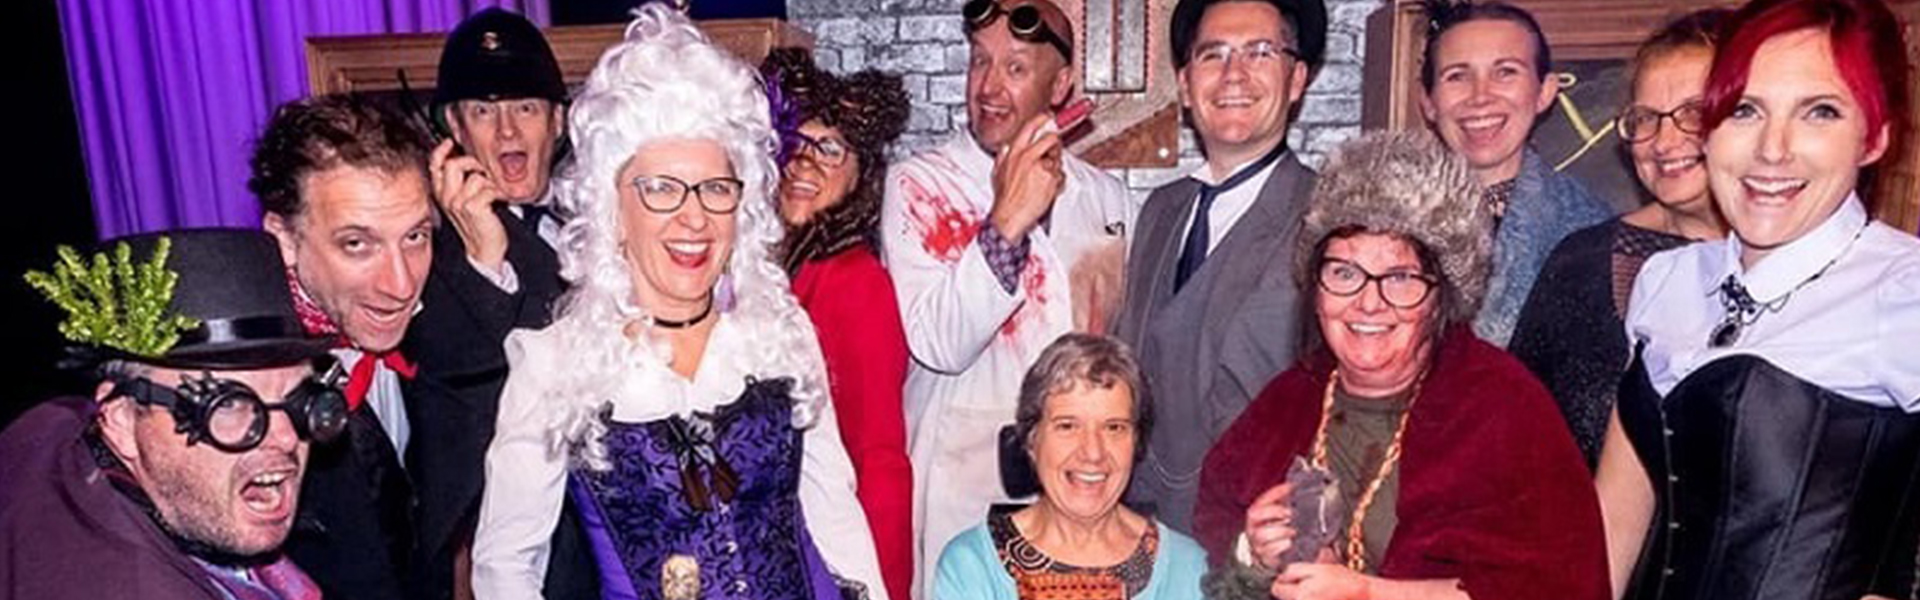 Fundraising Murder - Mystery Plays